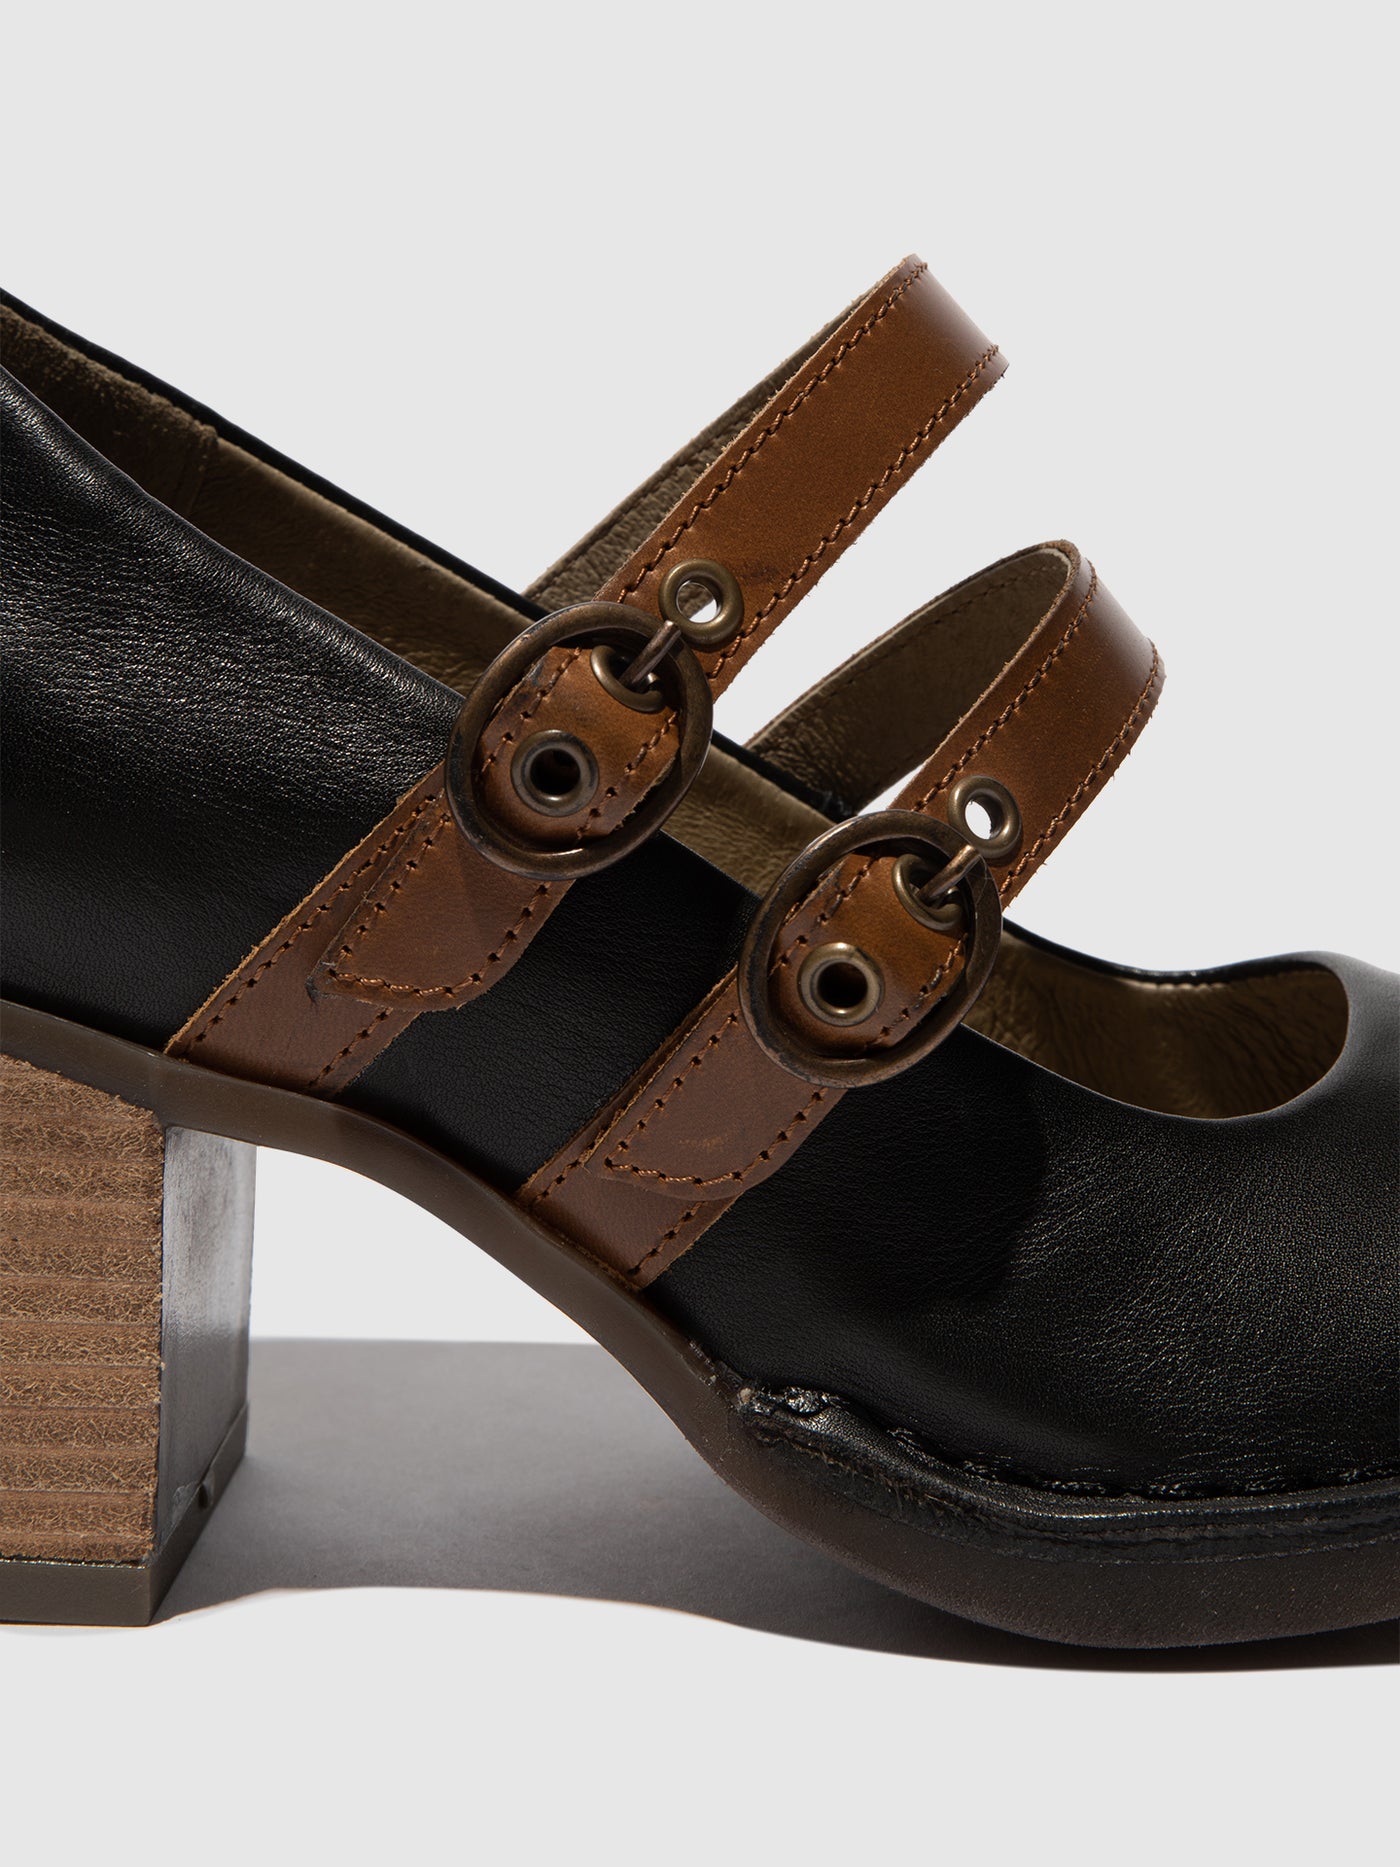 Double Buckle Shoes BALY106FLY BLACK/CAMEL